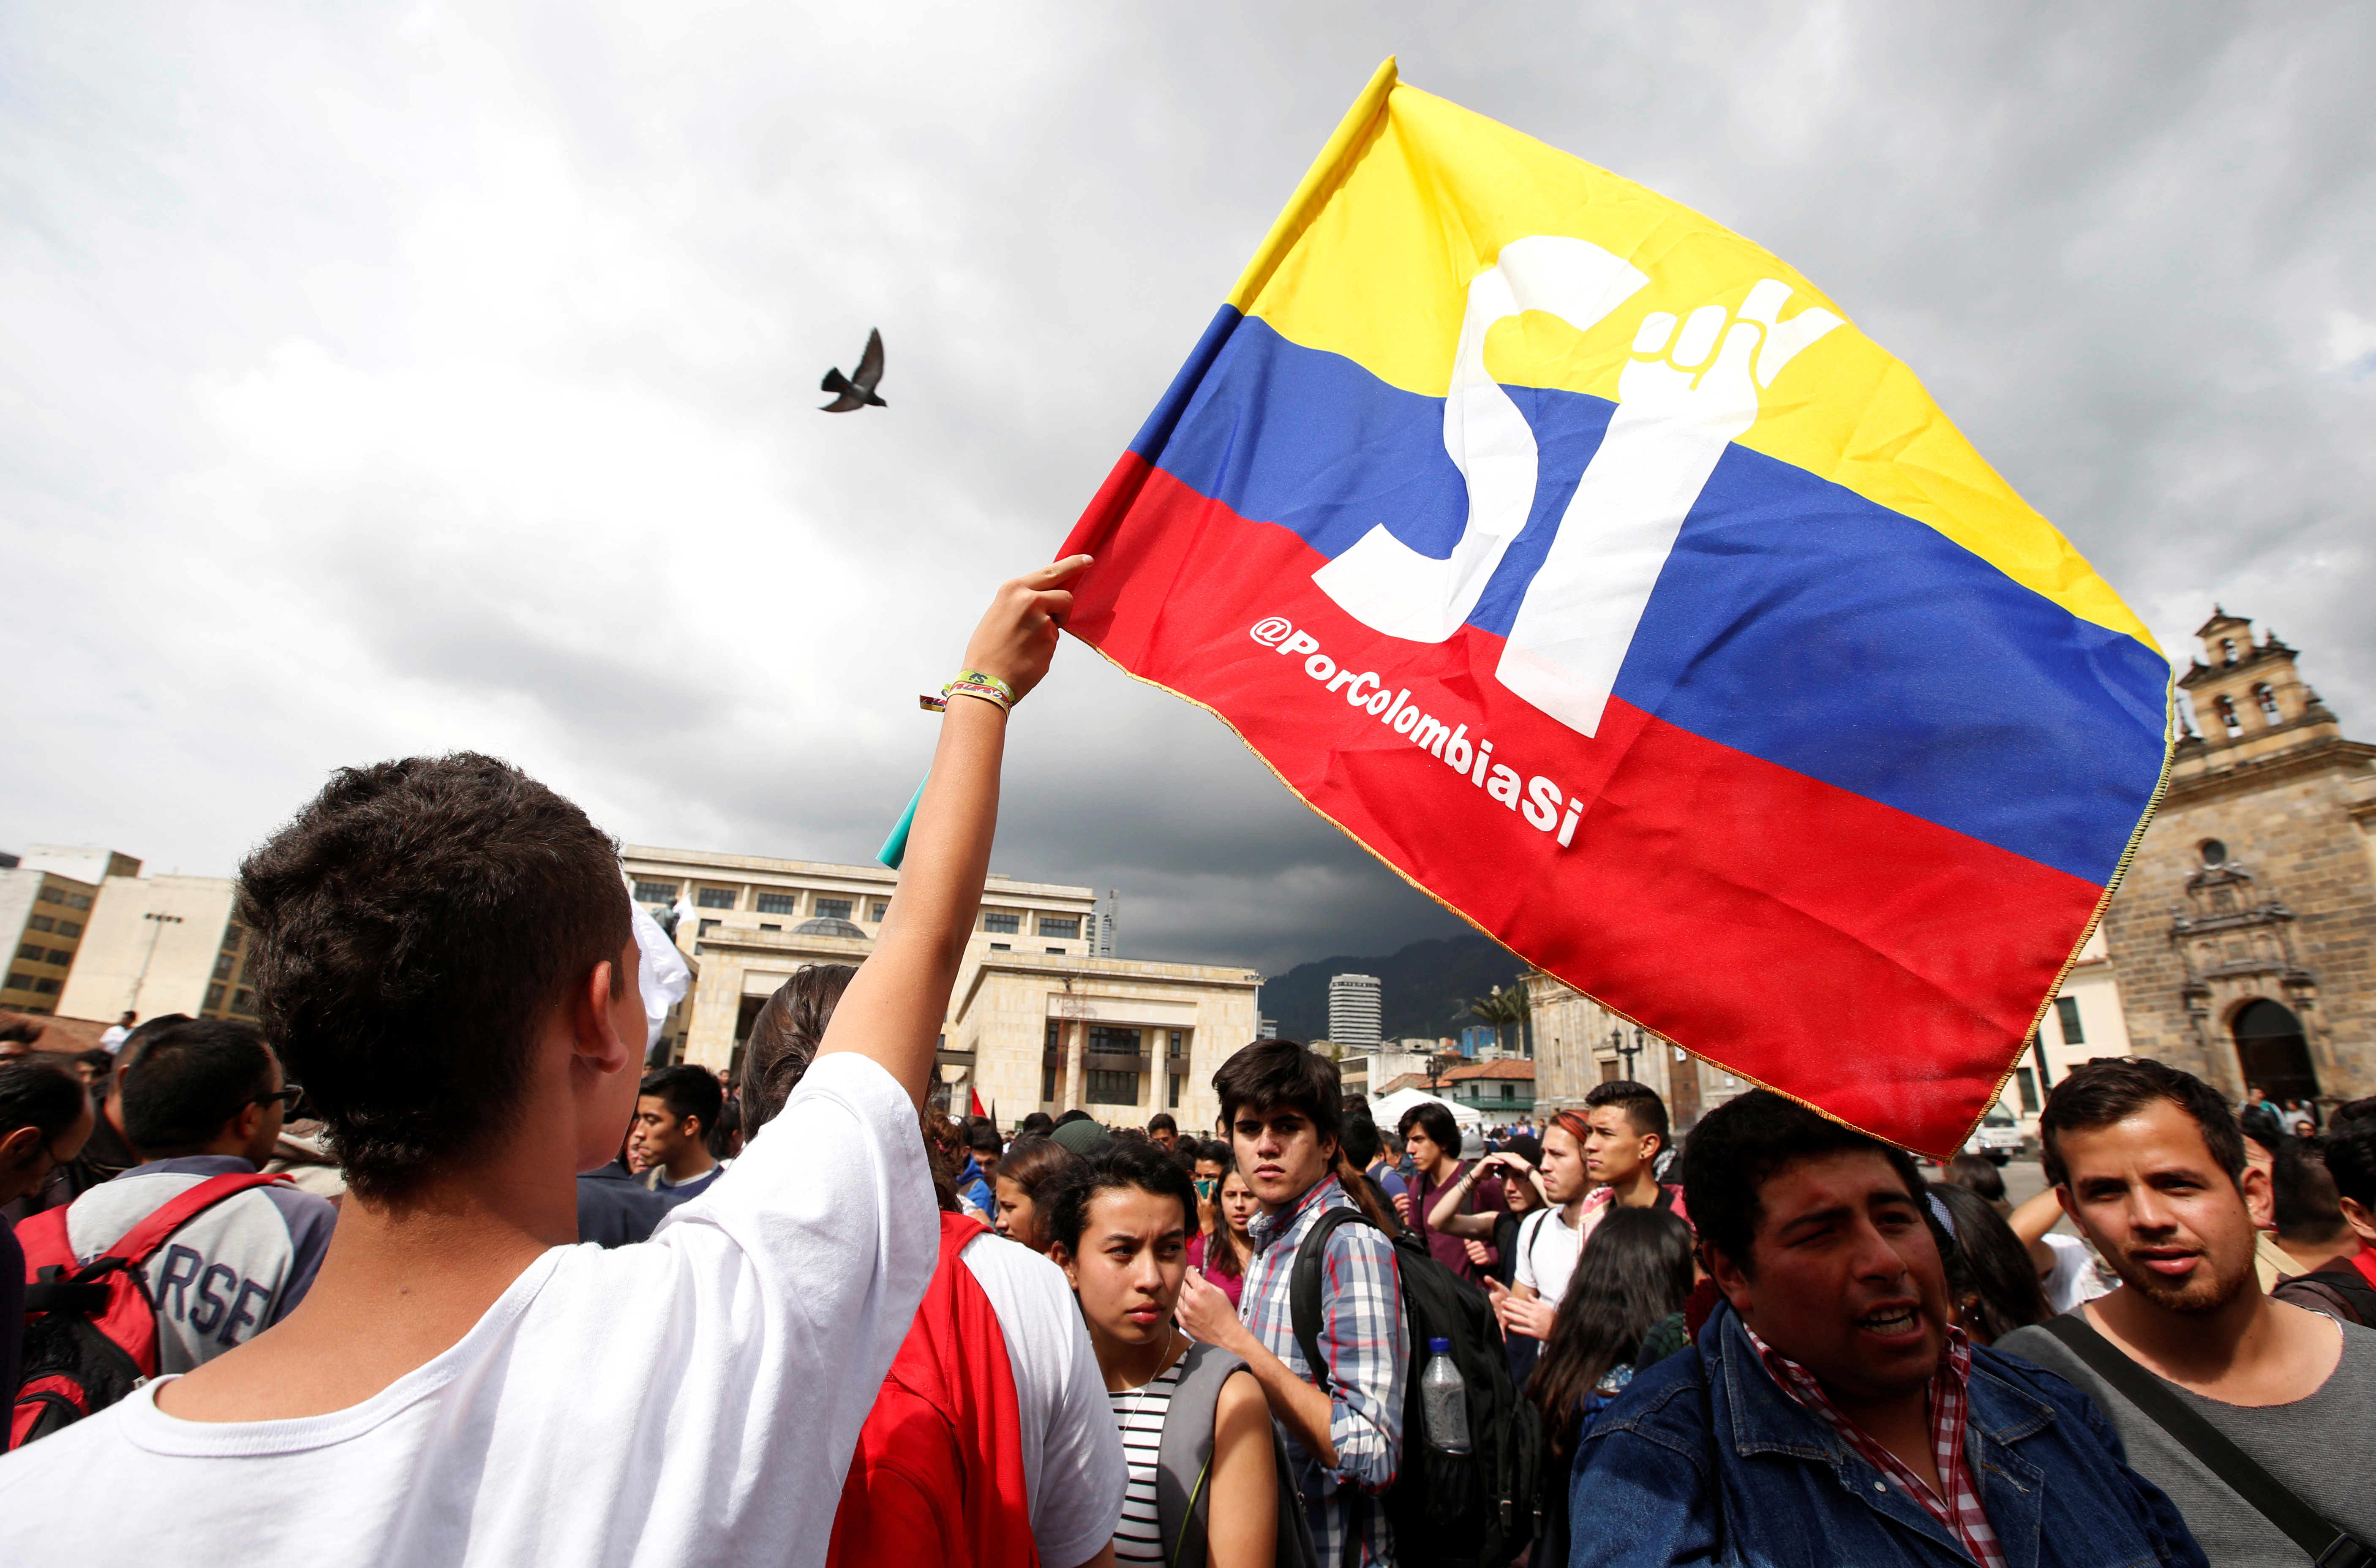 University students and supporters of the peace deal signed between the government and Revolutionary Armed Forces of Colombia (FARC) rebels display a flag during a rally in front of Congress in Bogota